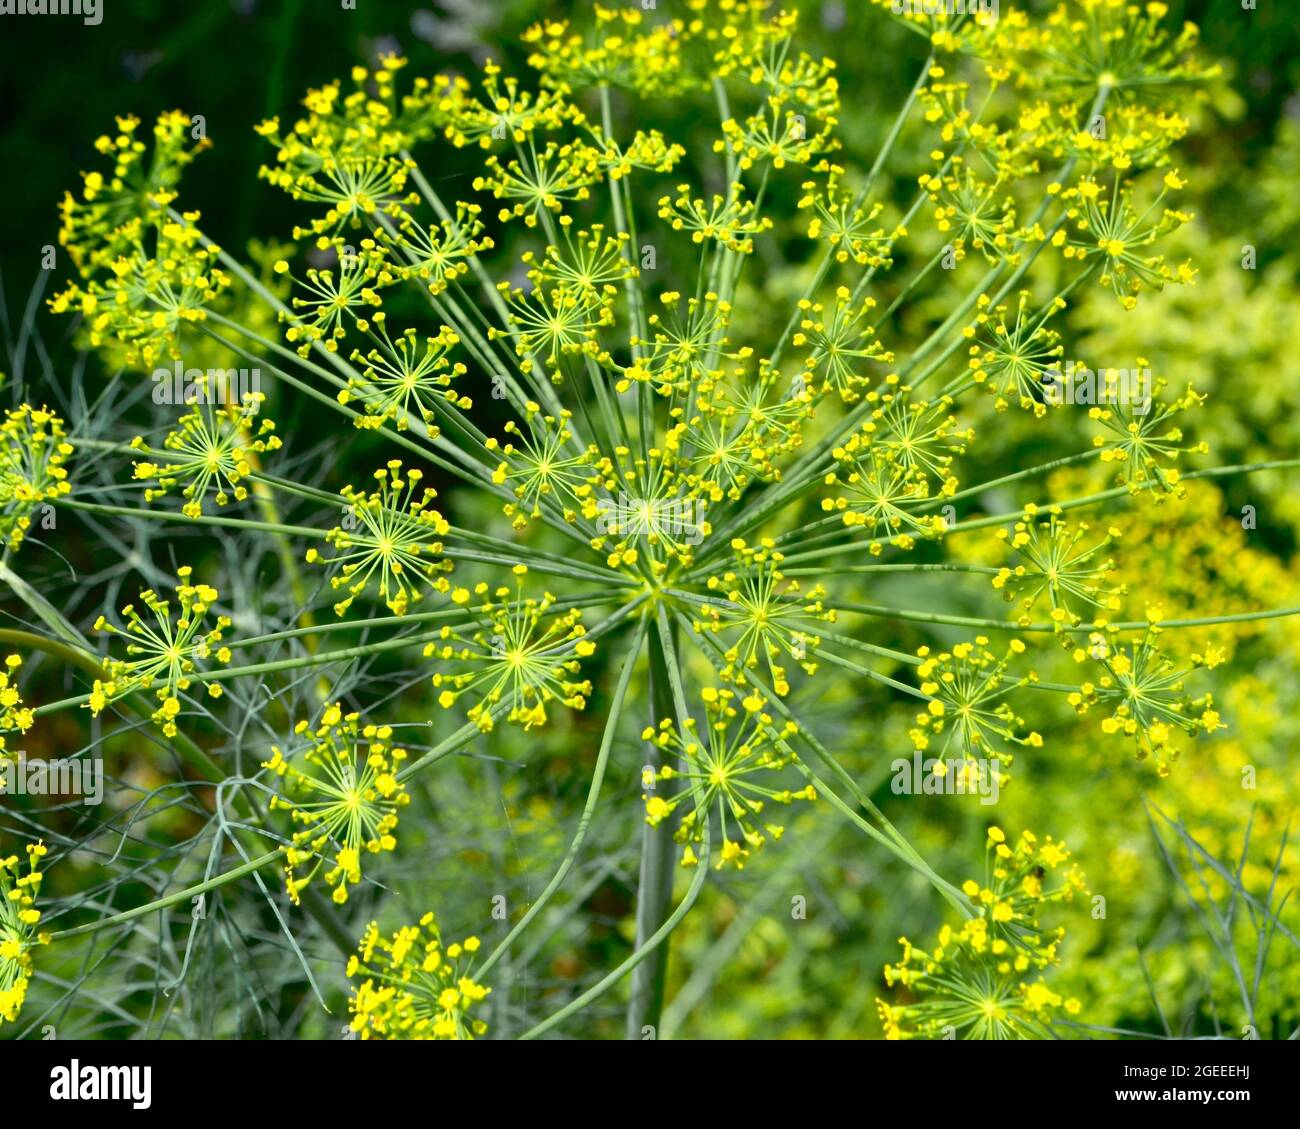 The fennel flowerhead is a series of flat umbels made up of many tiny yellow flowers held on short flower stalks. Closeup. Stock Photo